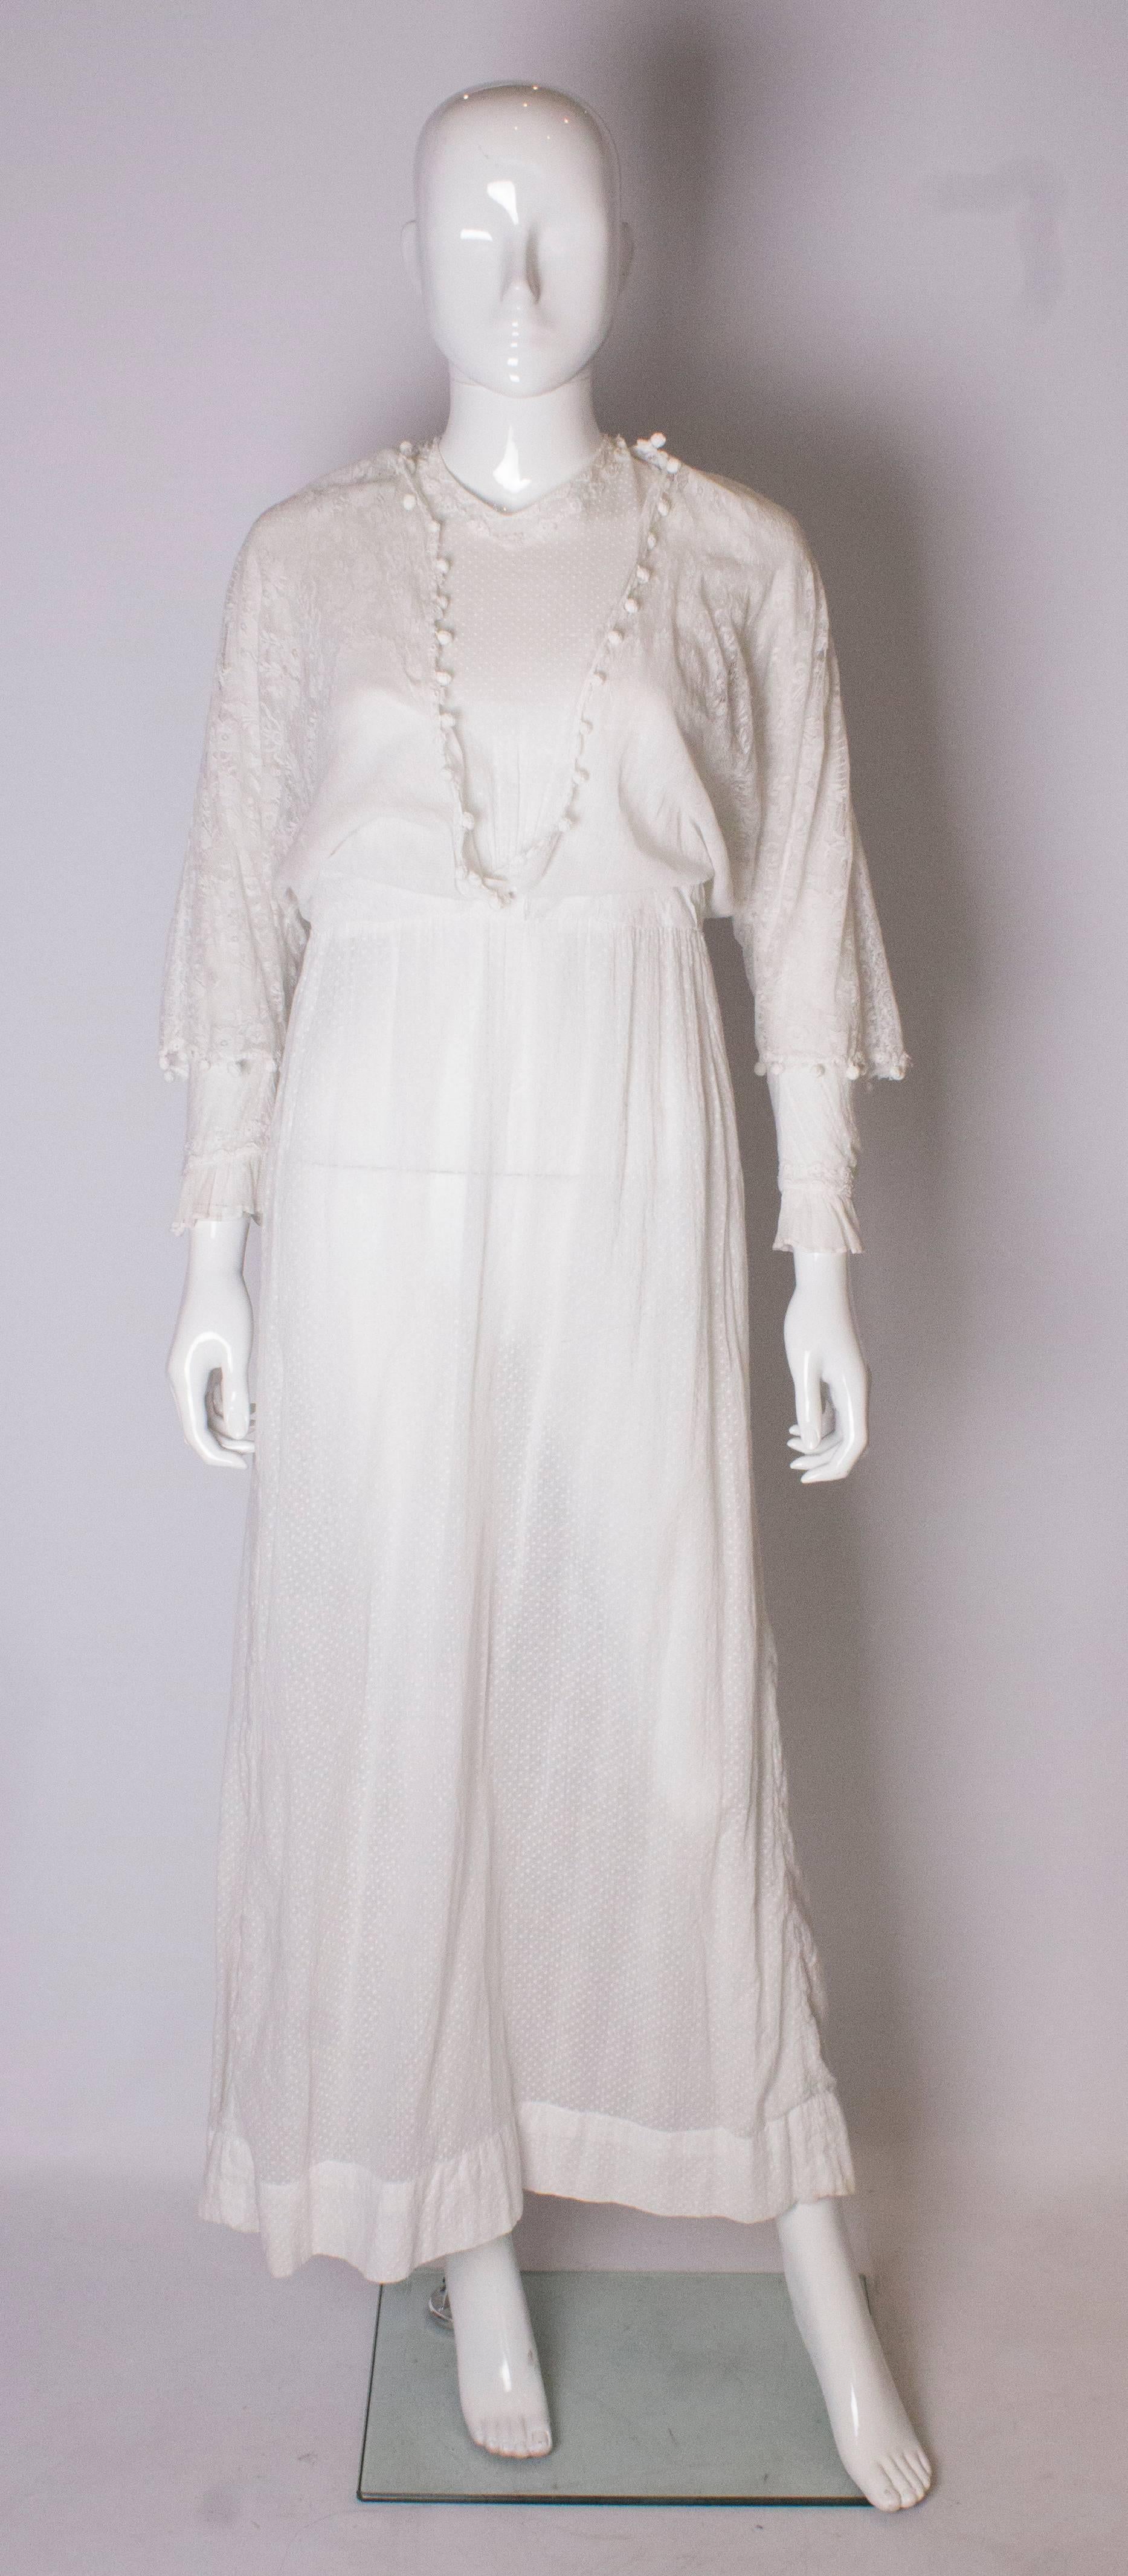 A pretty white edwardian dress, with cotton spot detail . The dress has lace over the sleeves and bodice front, and back.The sleeves have a lace detail at the cuffs, and the bodice has a  pleat detail. It fastens with hooks and eyes at the back.